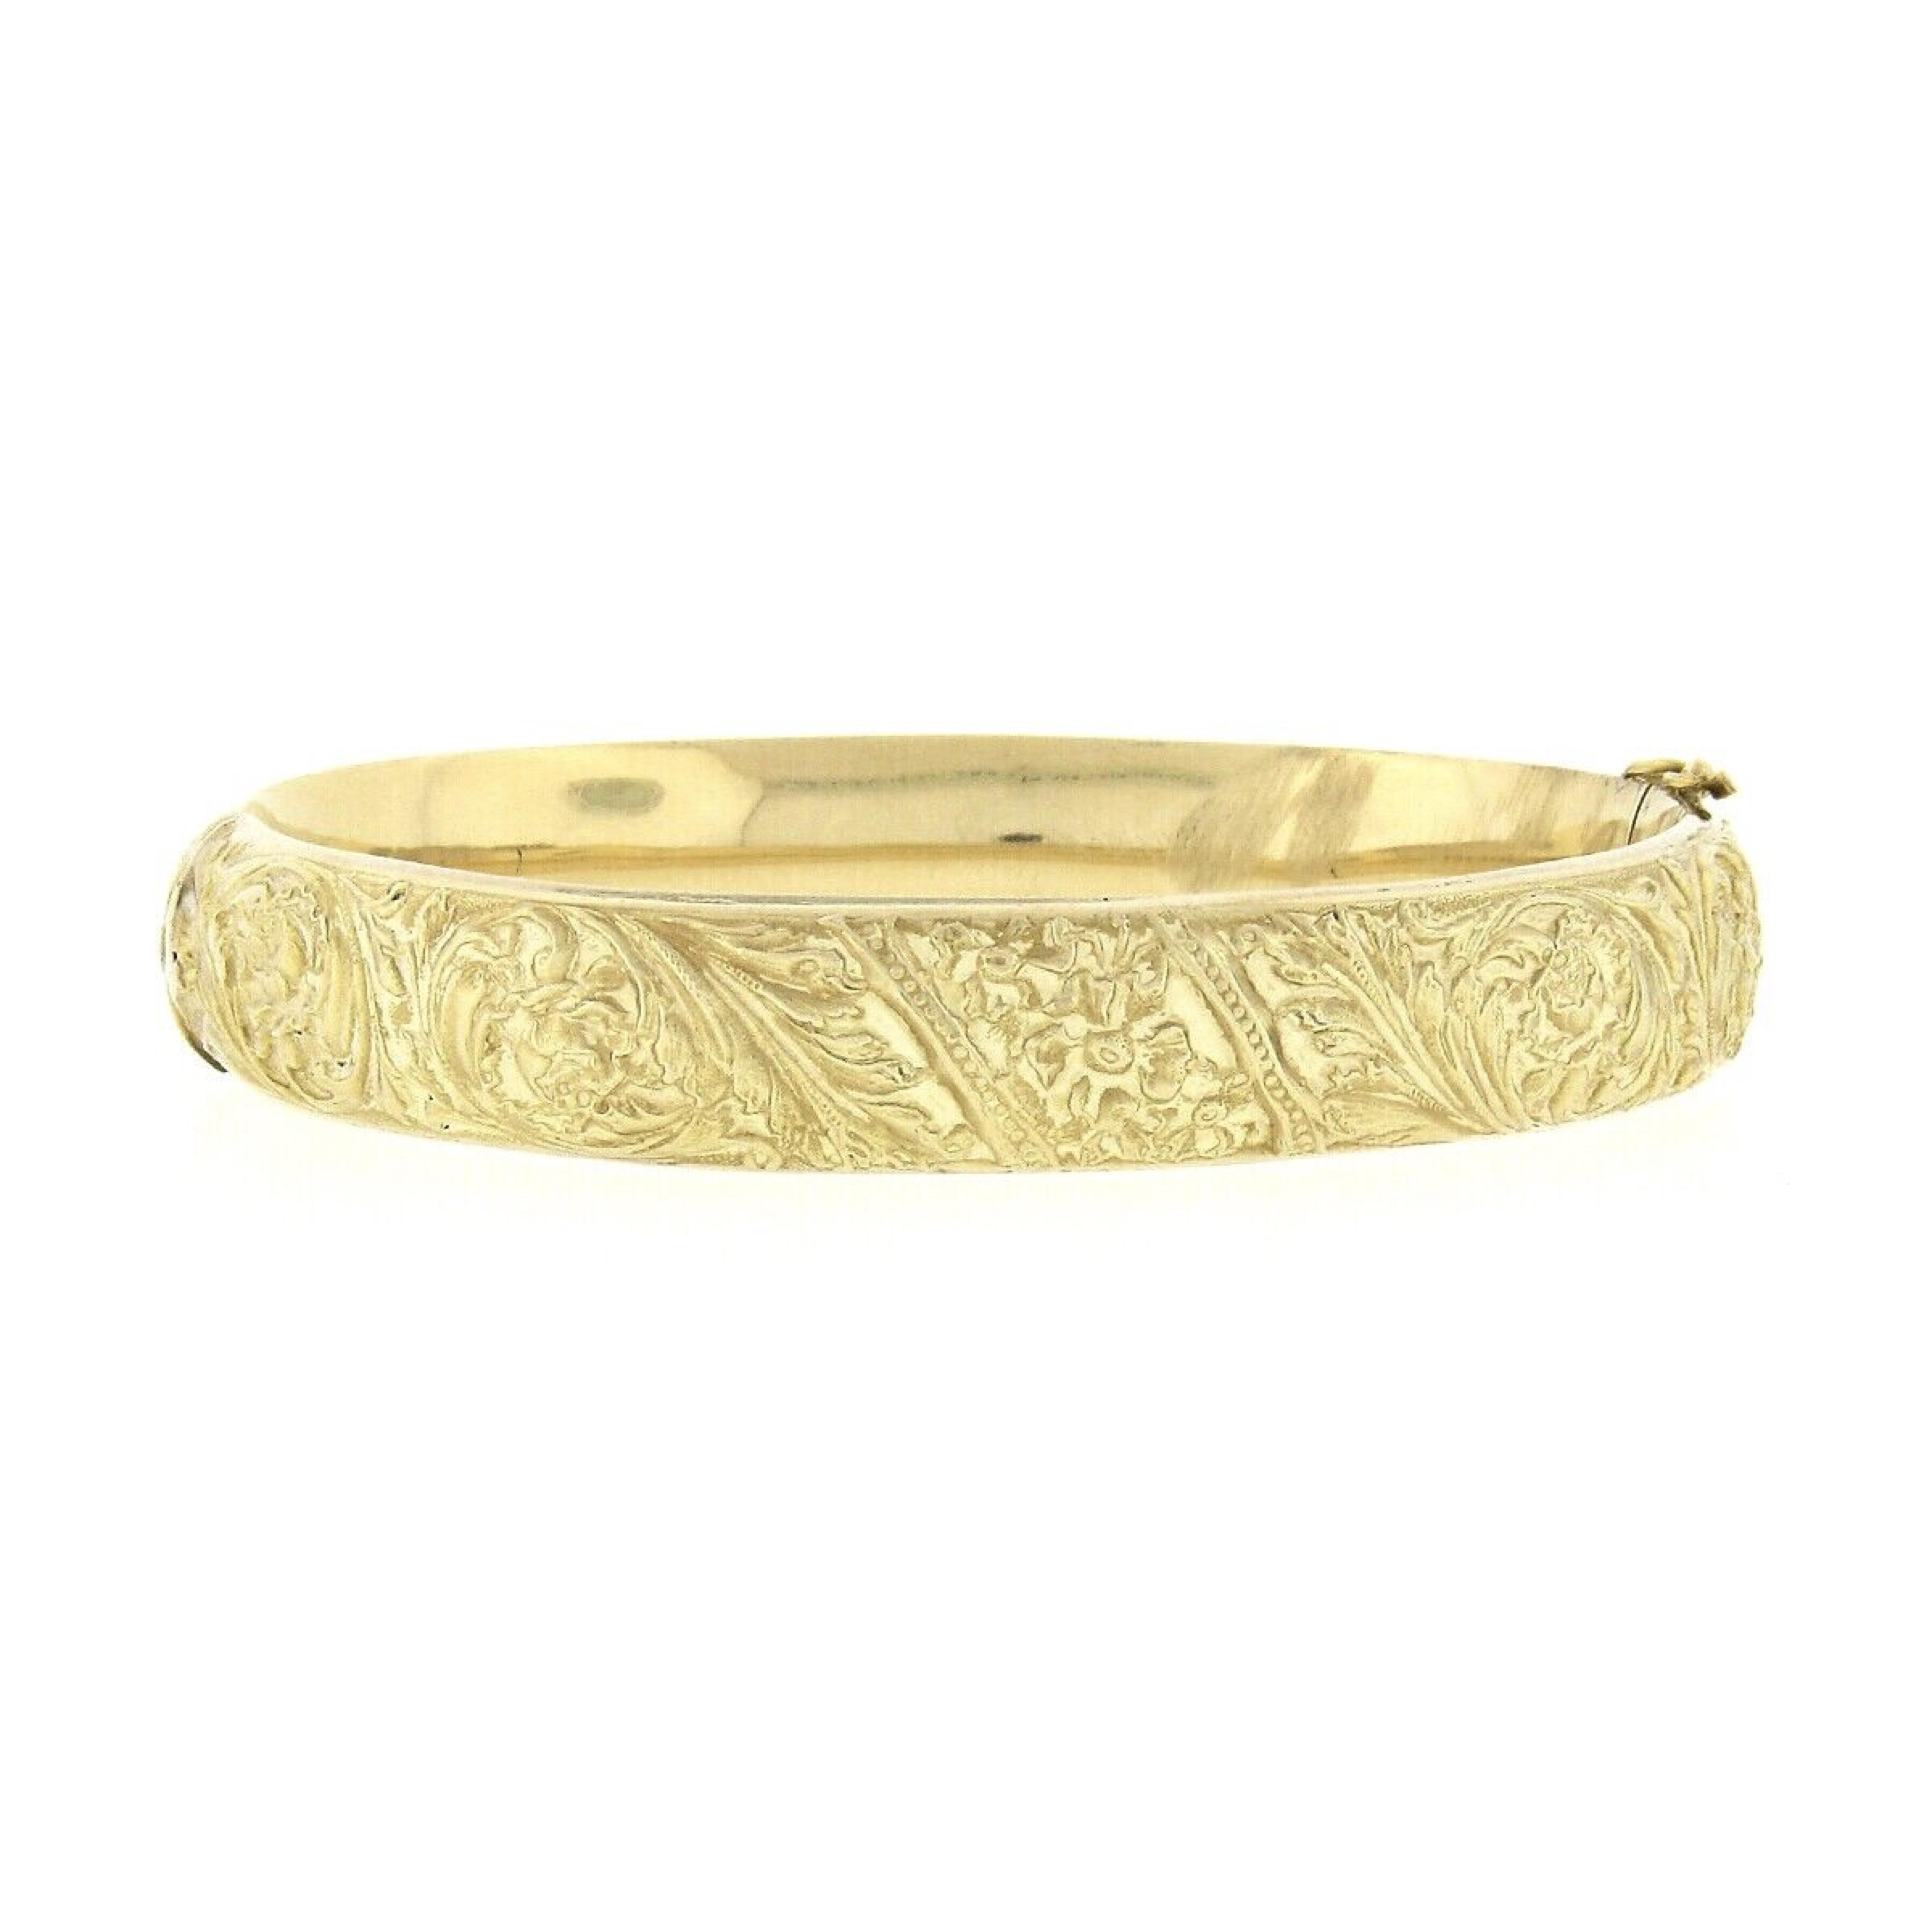 Here we have an elegant antique bangle bracelet was crafted during the art nouveau period in solid 18k yellow gold. It features absolutely gorgeous floral repousse work throughout the entire bracelet. This lovely engraved work gives this piece a